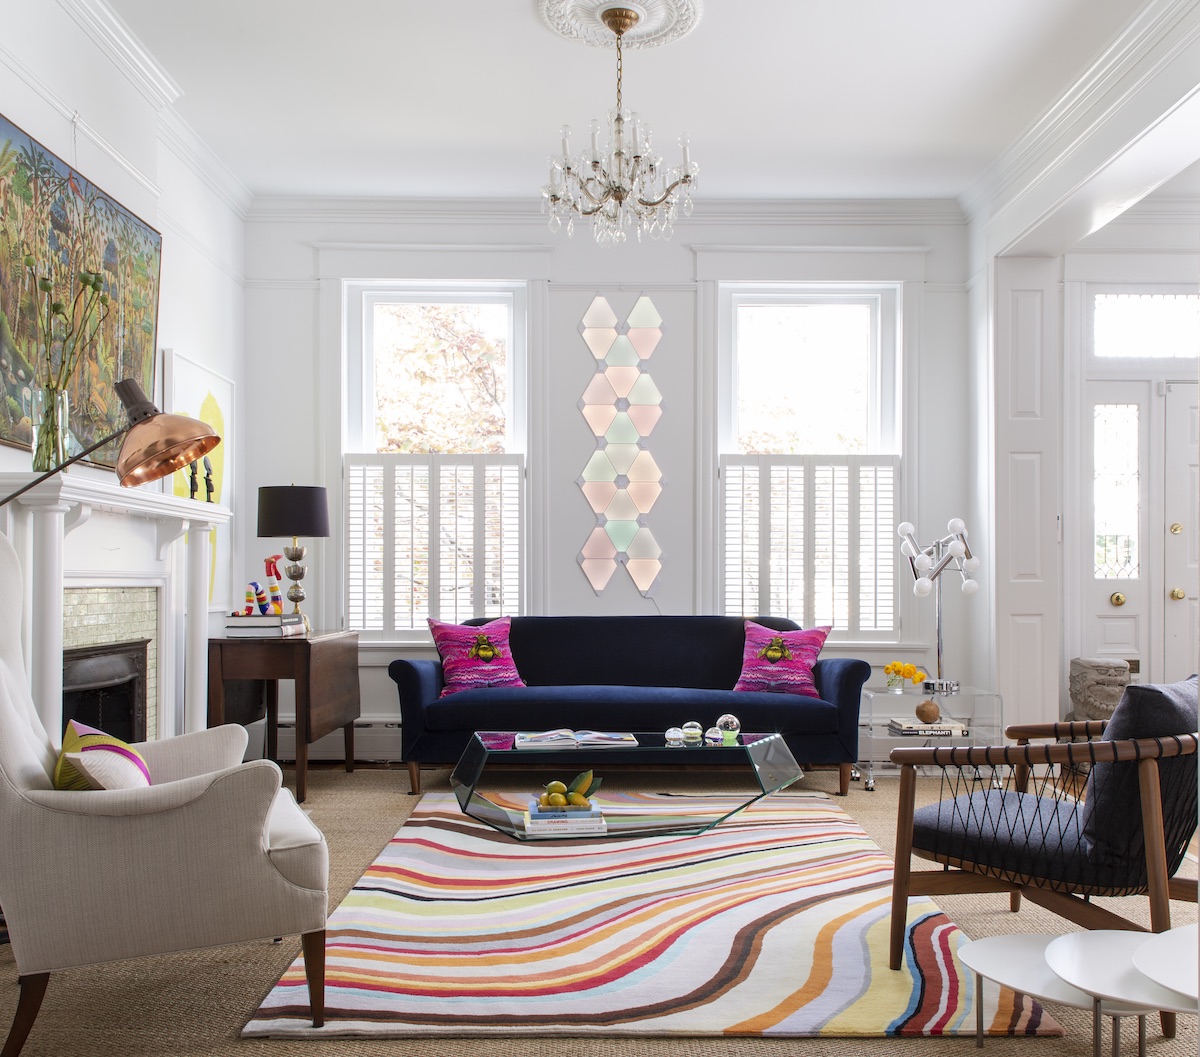 Tollett created a mash up of interesting pieces and colors to shake up a historic home. The custom blue sofa with a bench seat serves as a grounding element in the room.